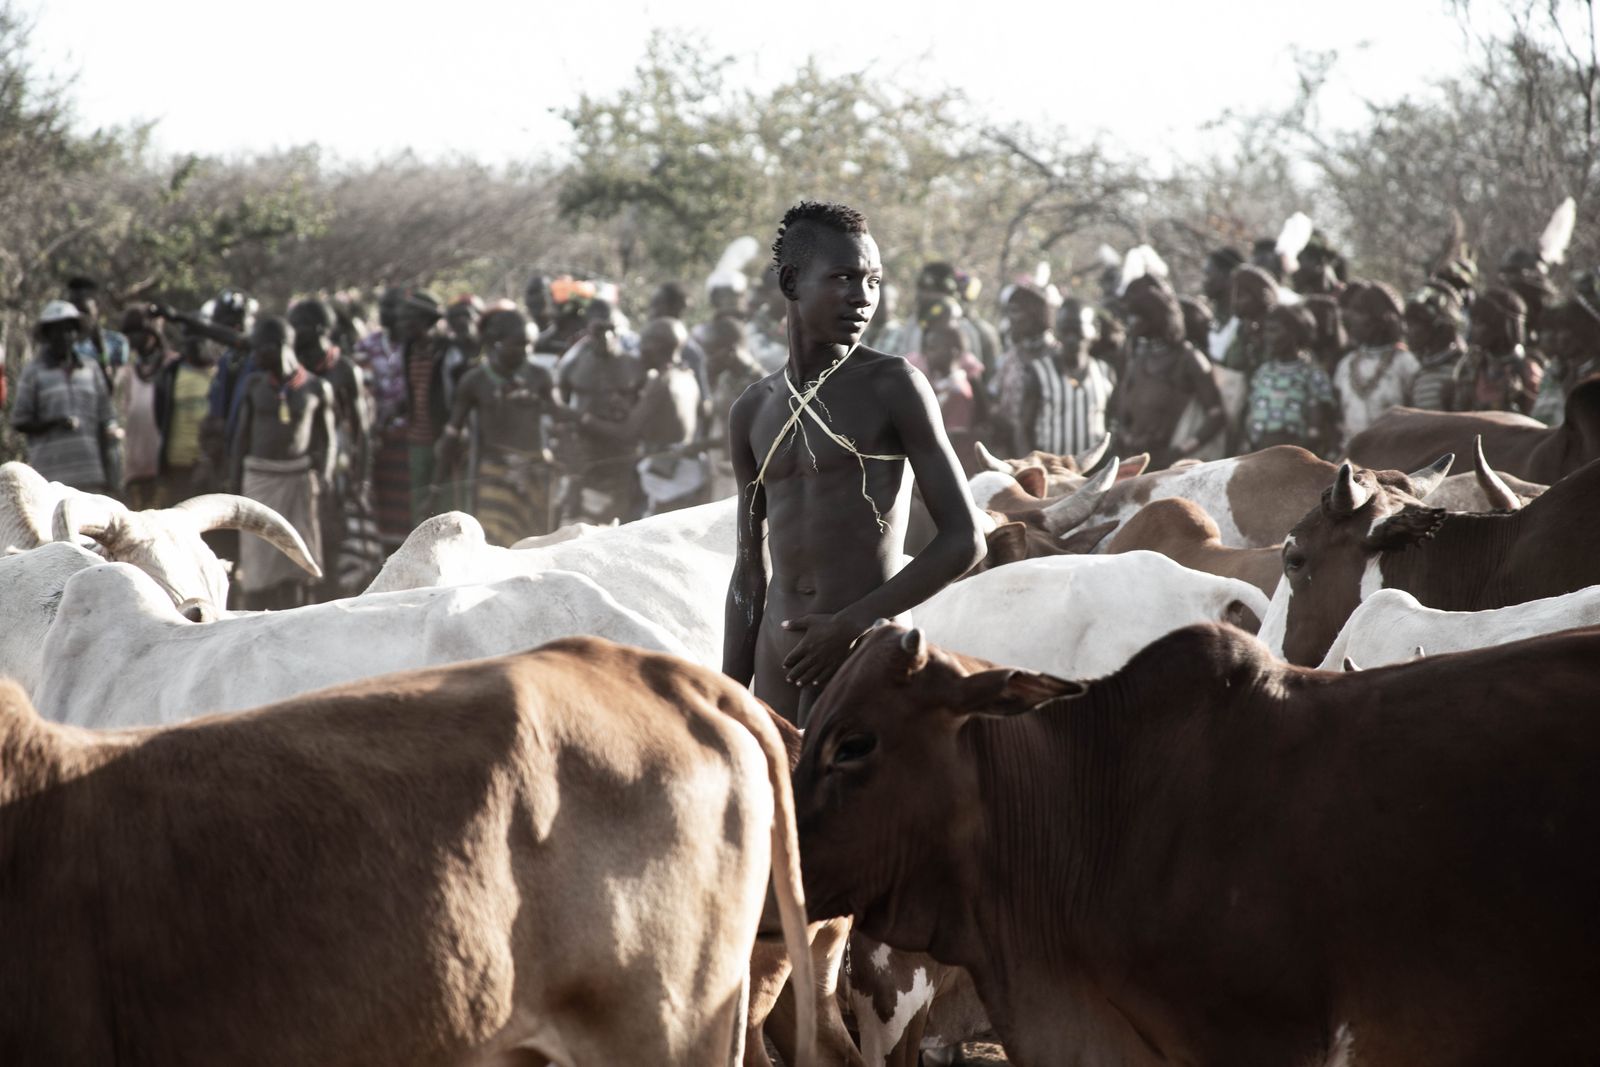 © Anthea Spivey - Image from the Hamer Bull Jumping Ceremony - Ethiopia photography project